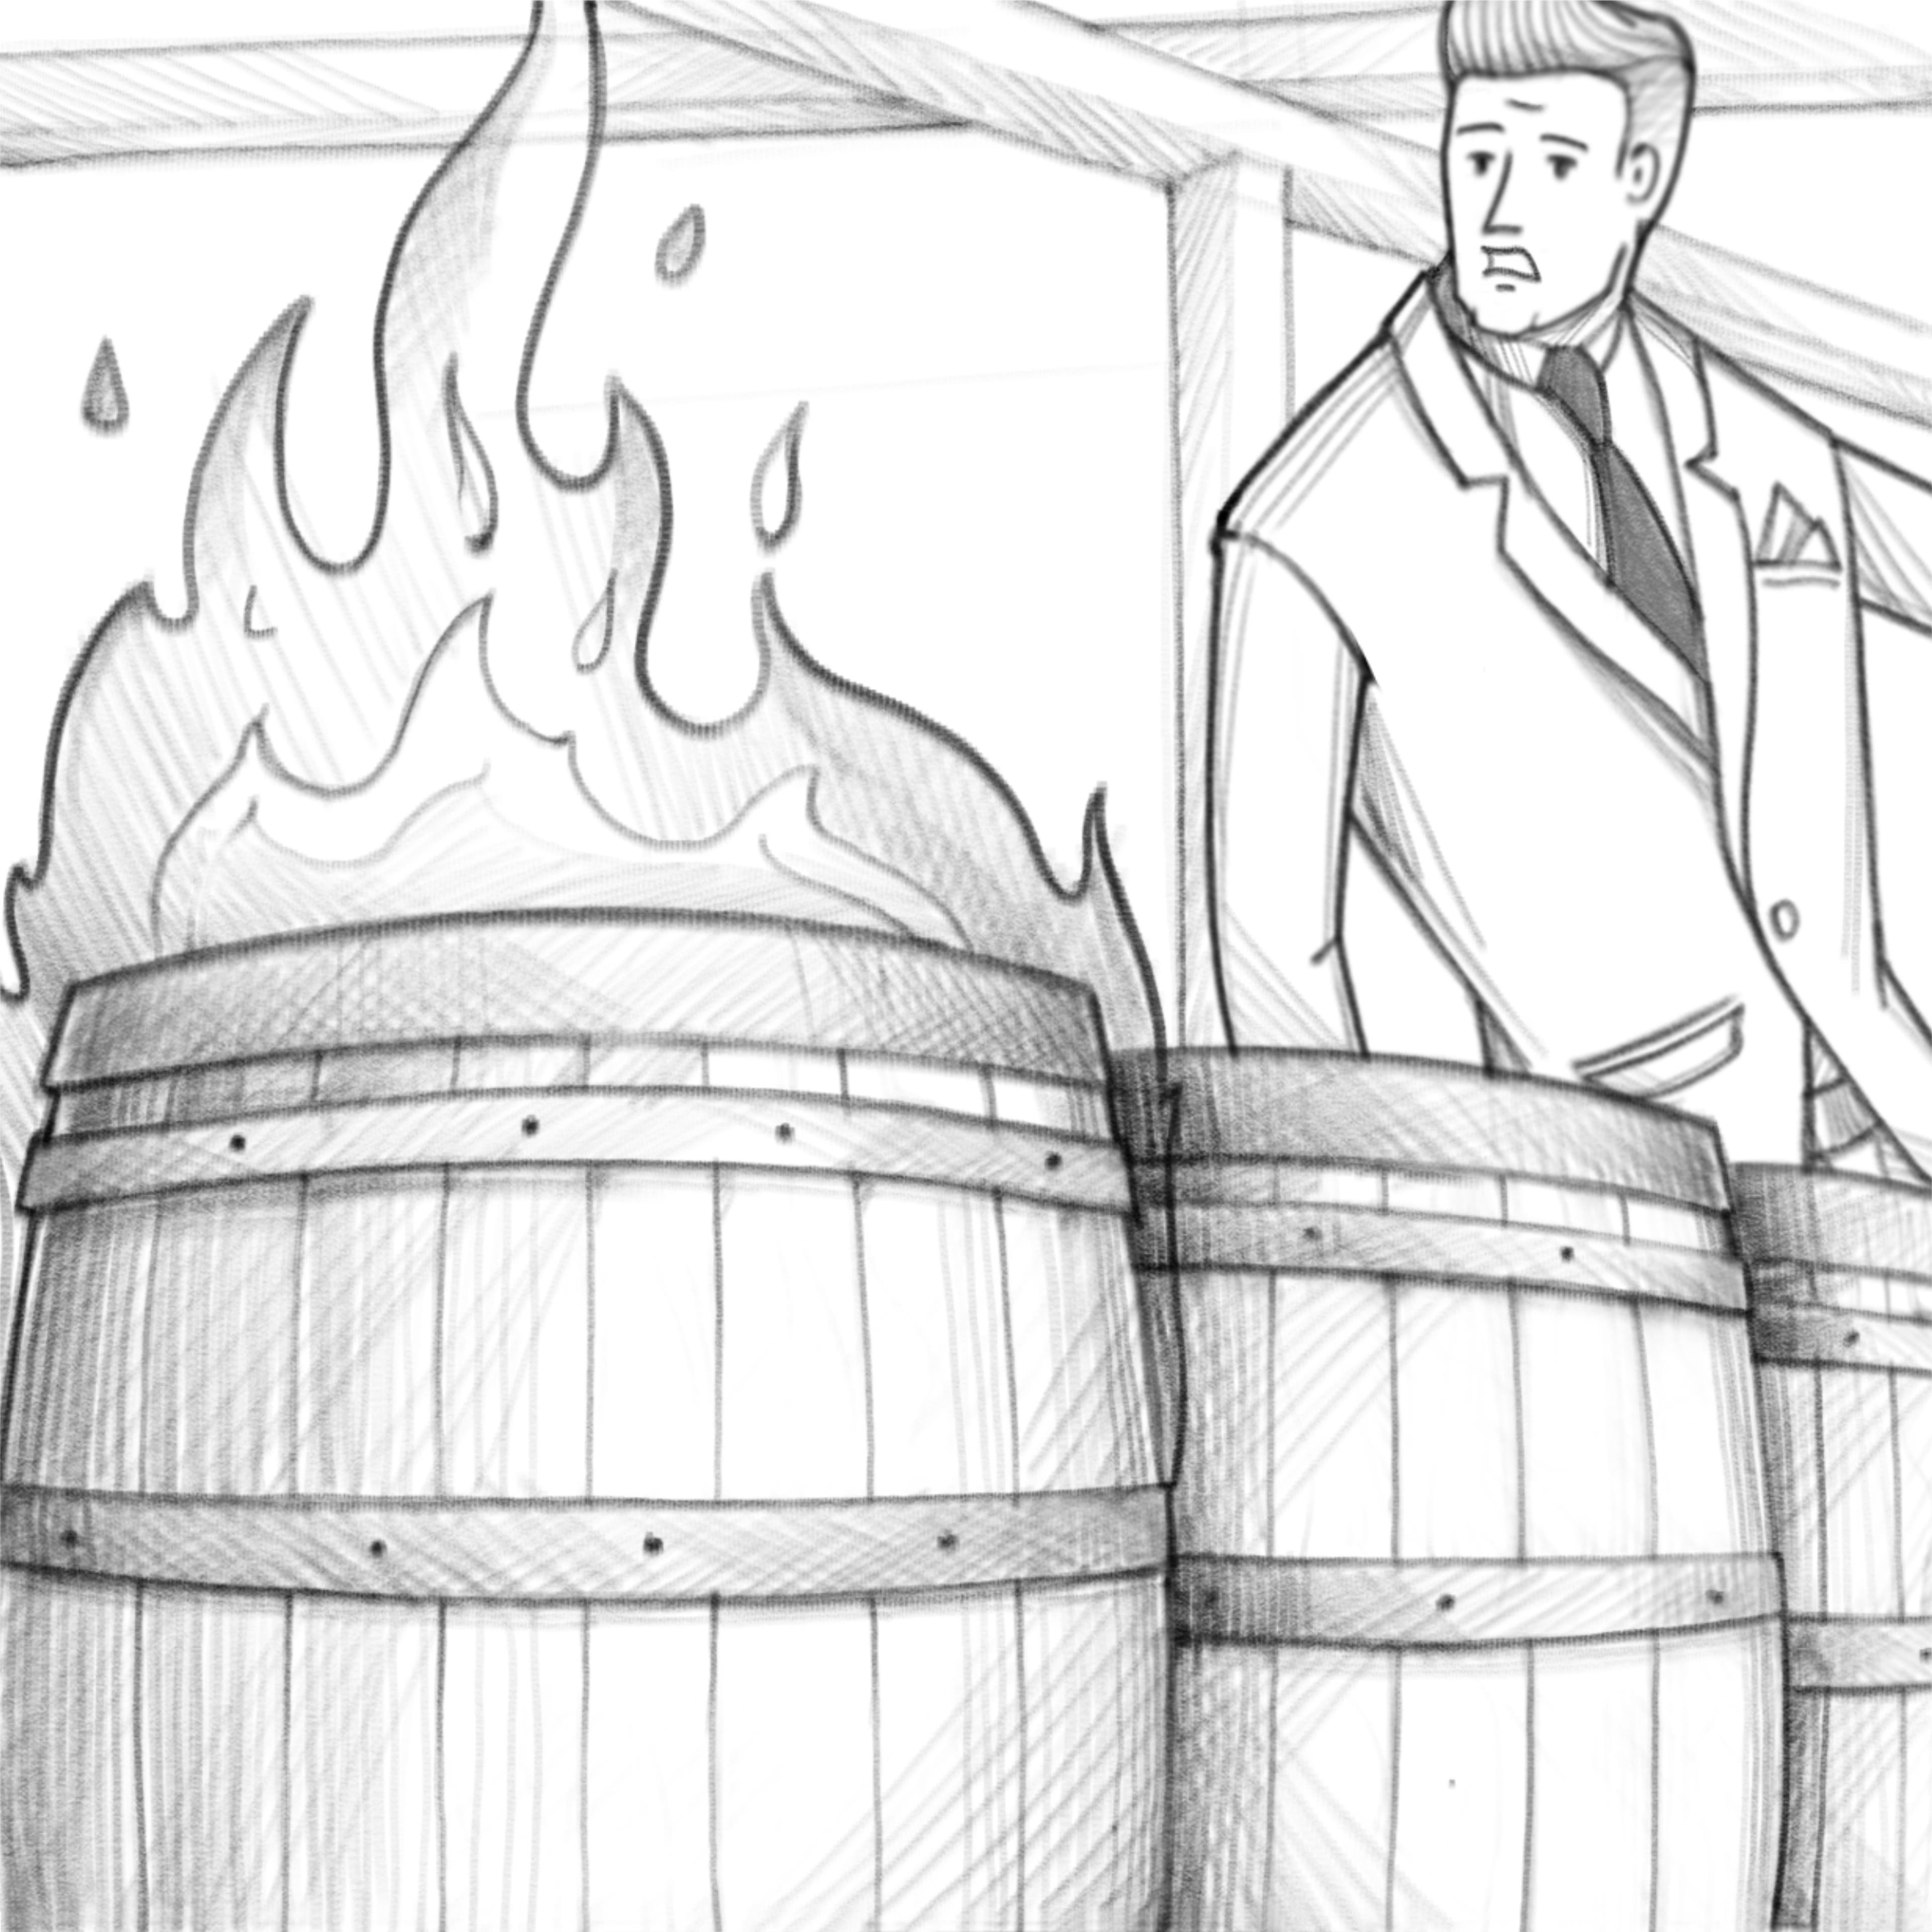 Episode 2: The one about a barrel on fire